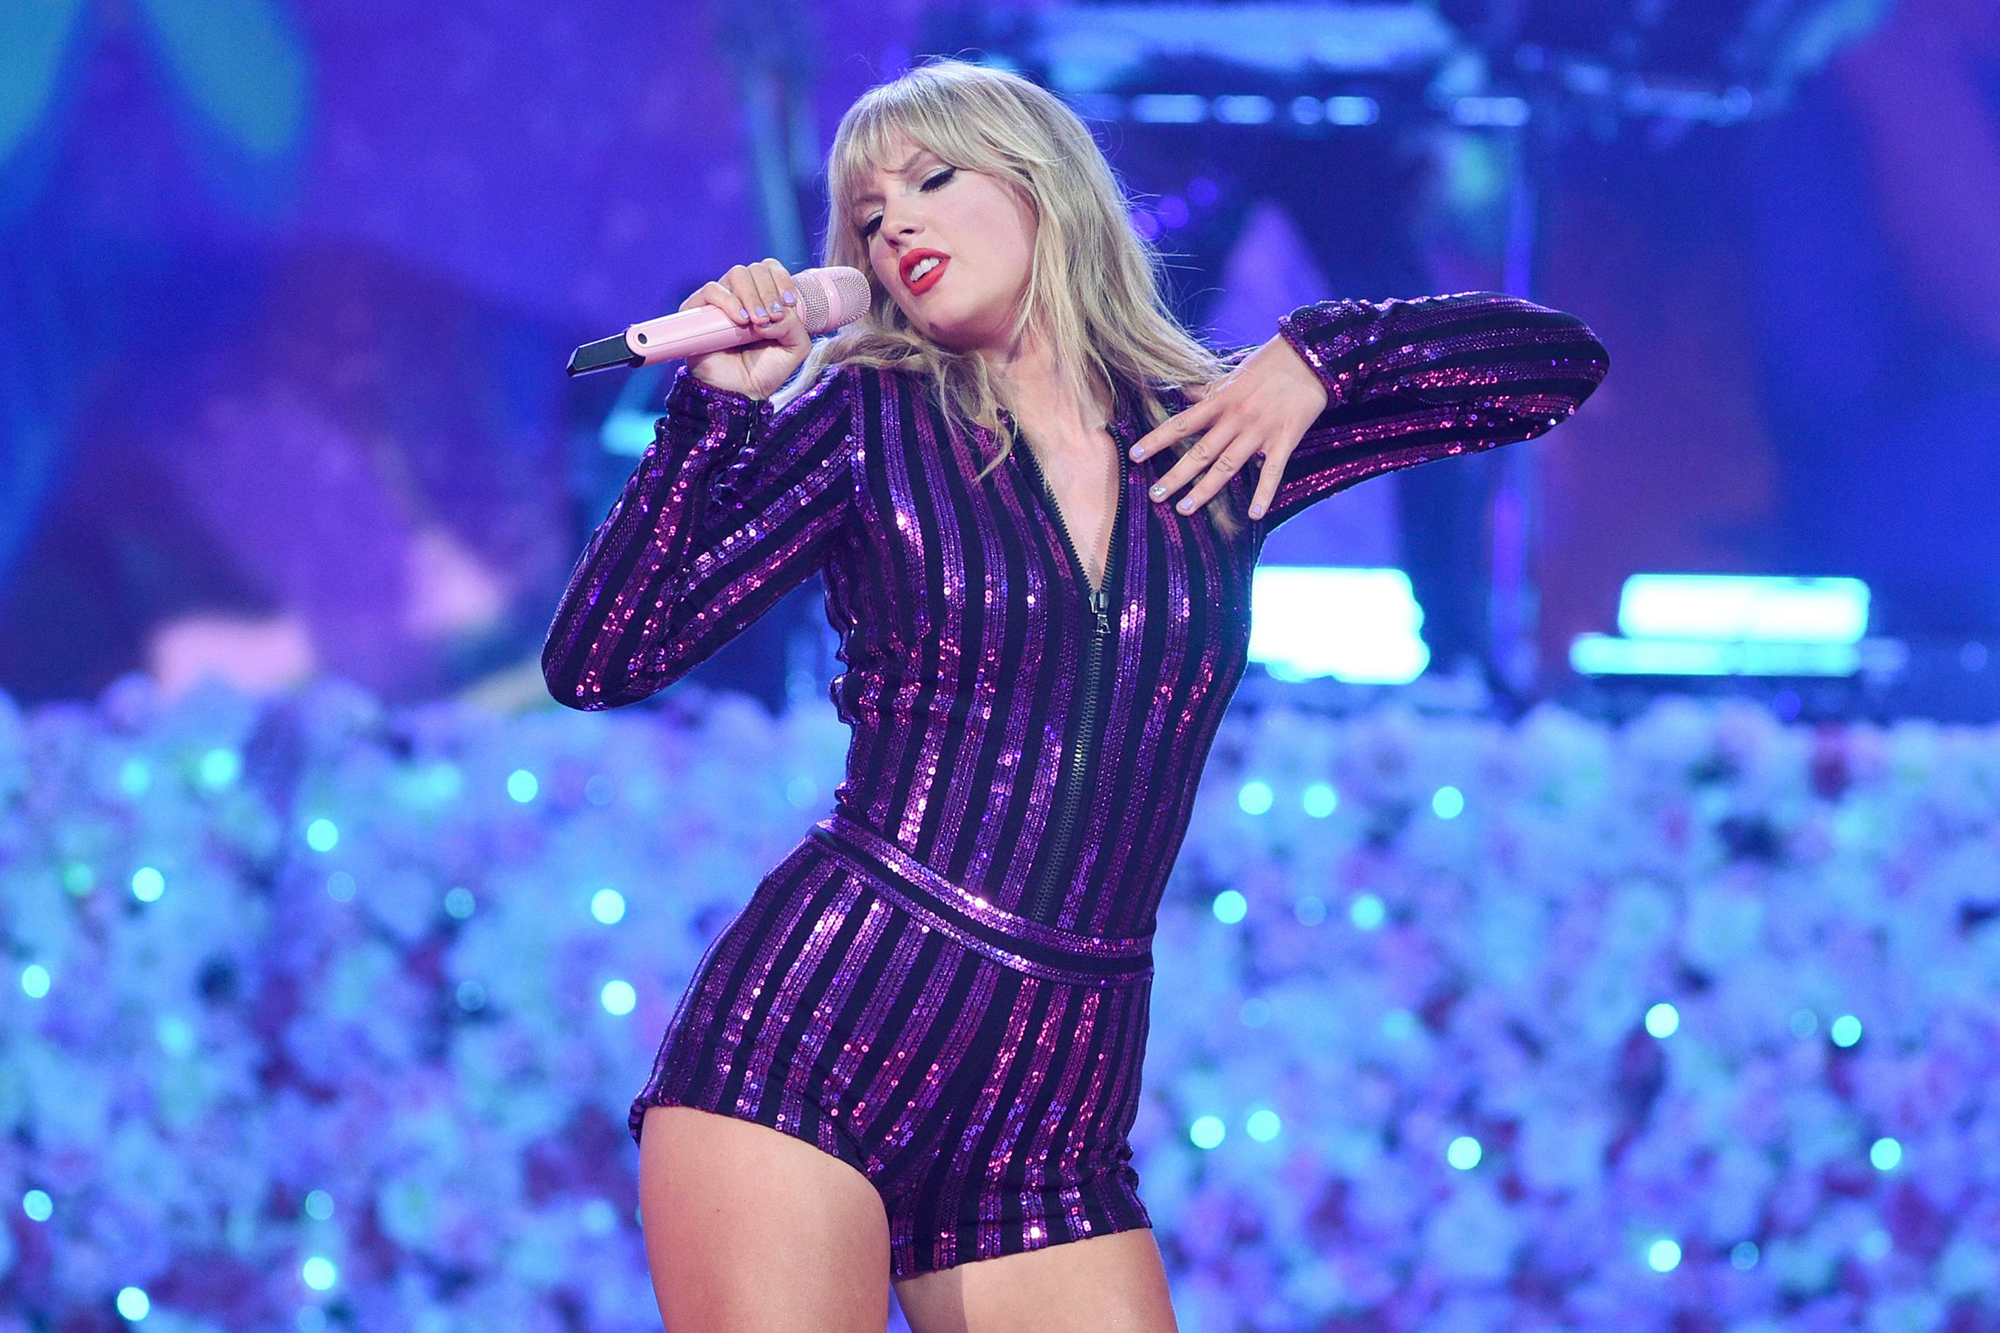 Taylor Swift's 'Lover': Breaking Down the Most Telling Lyrics